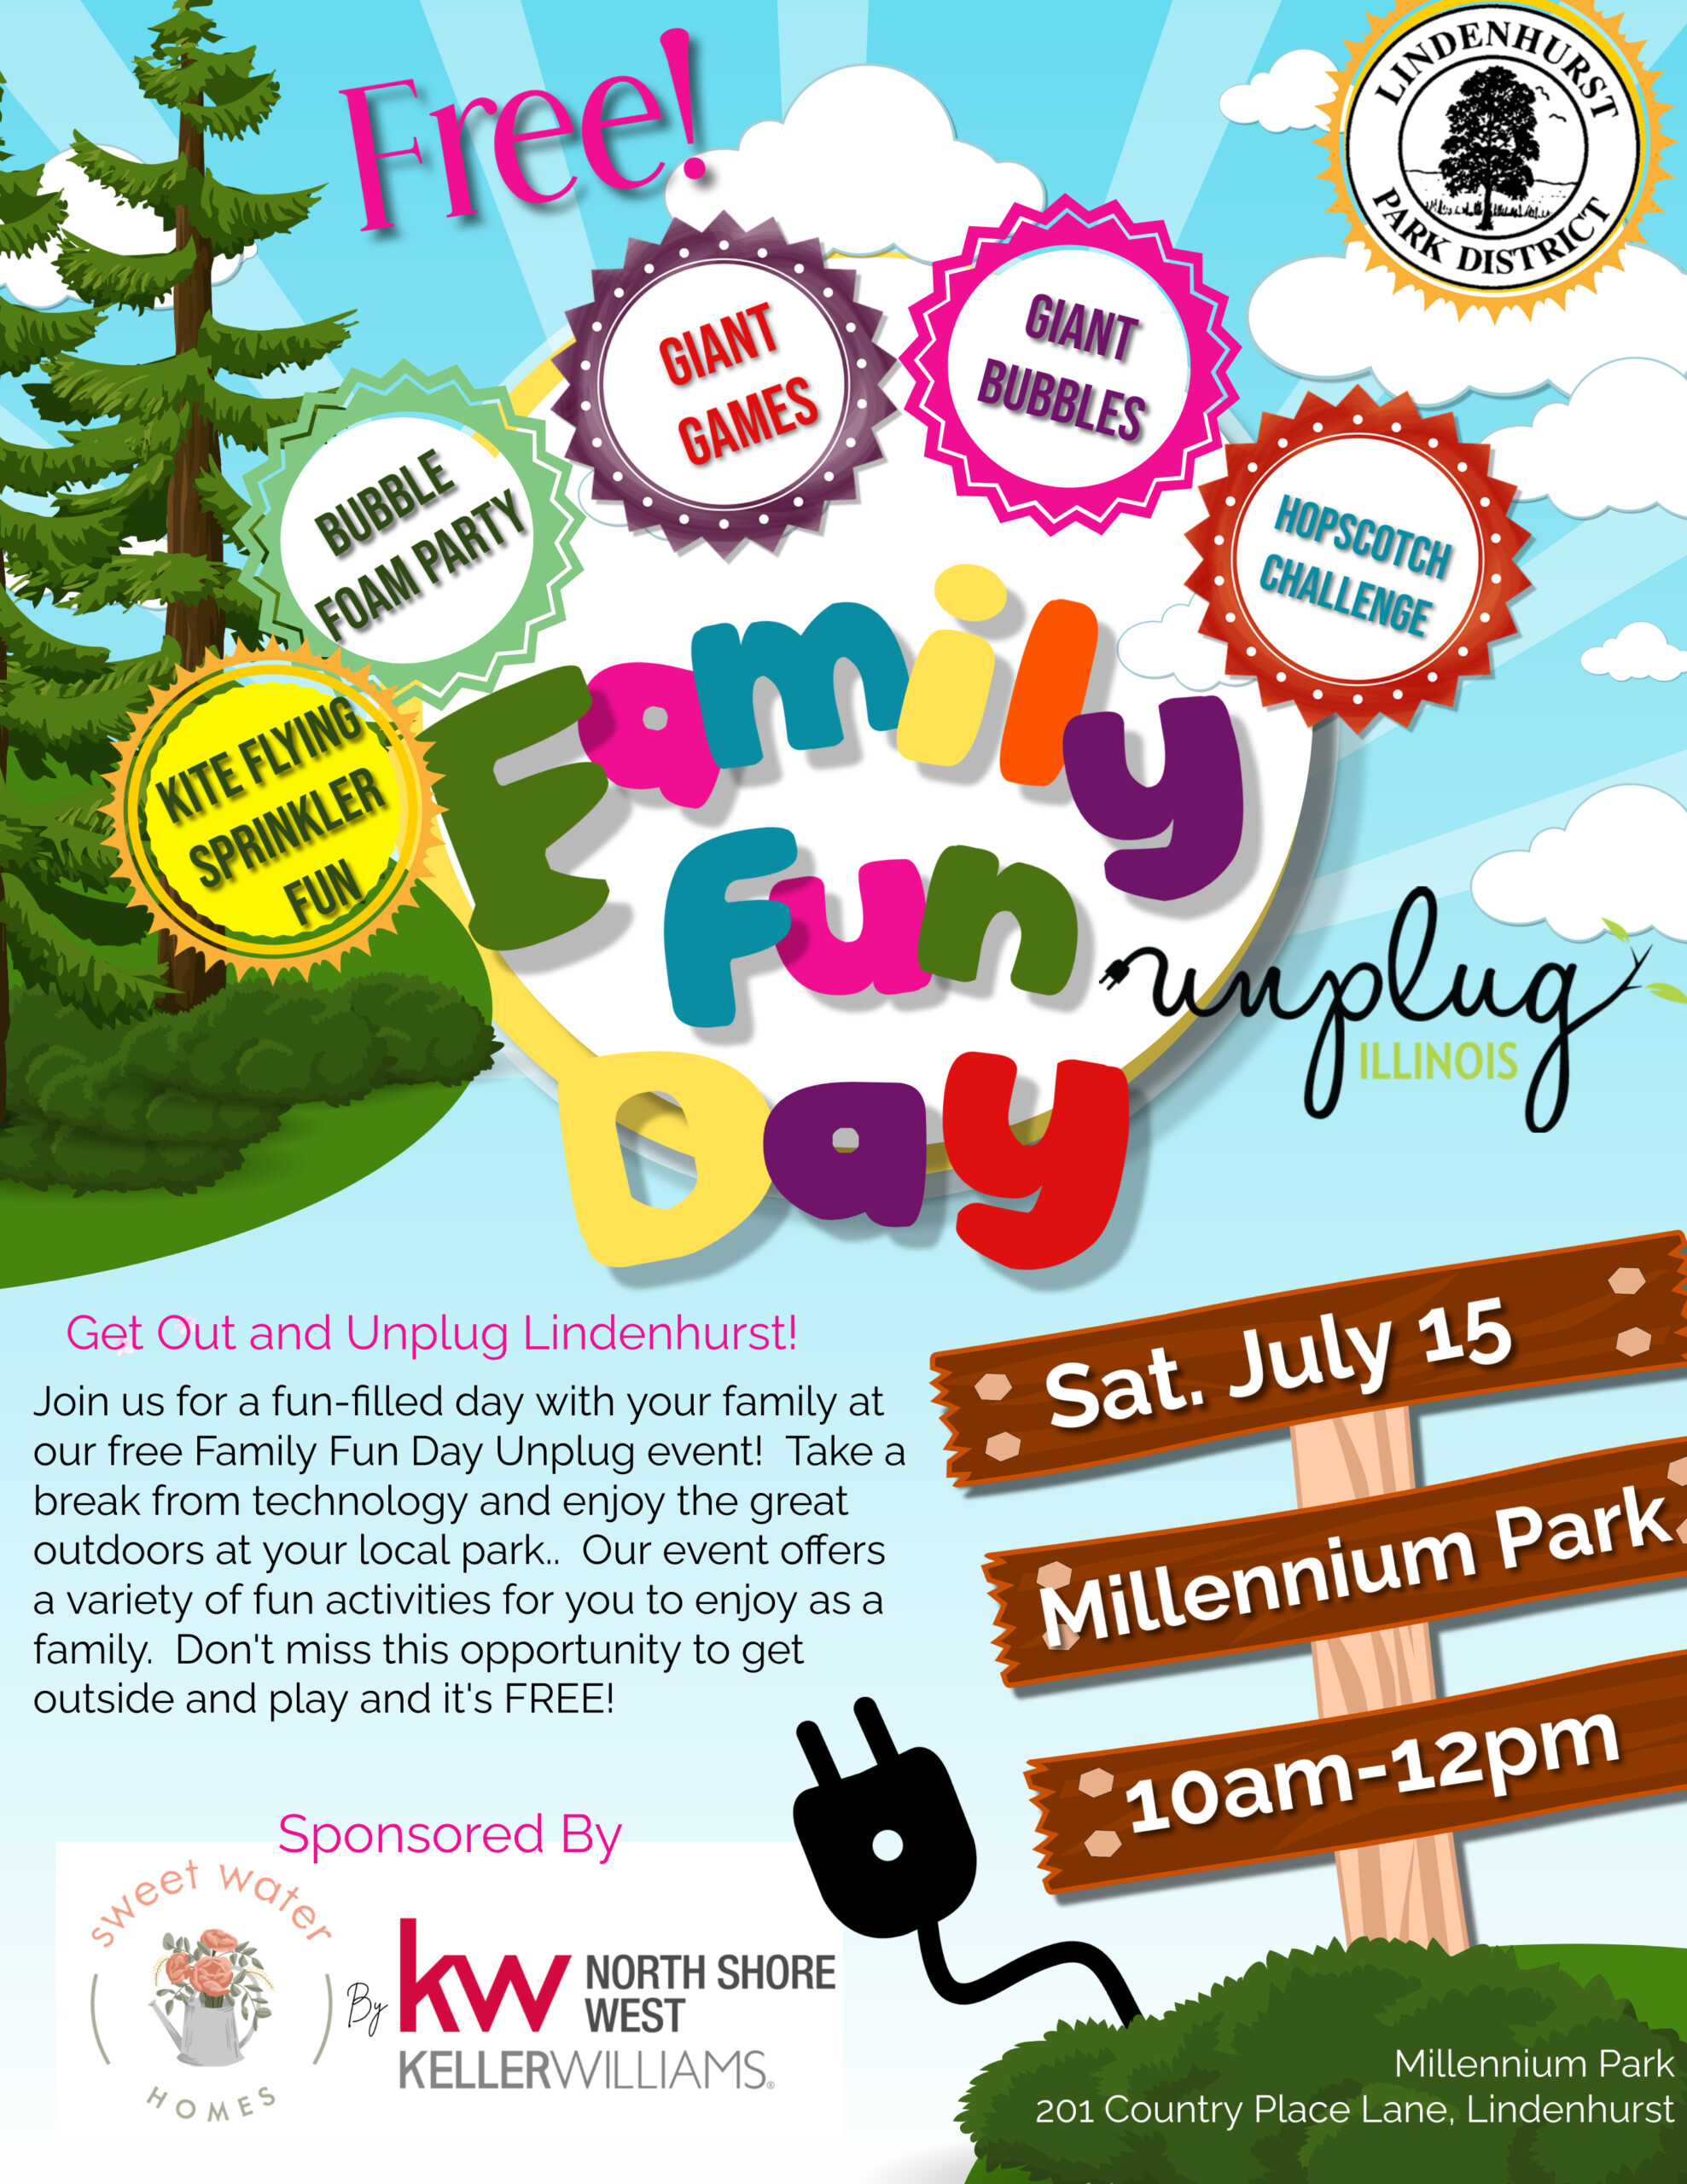 A vibrant flyer for a free "Family Fun Day" event in Lindenhurst, Illinois, encouraging families to unplug and enjoy outdoor activities like bubble foam parties, giant games, kite flying, and a hopscotch challenge. The event is scheduled for Saturday, July 15, from 10am to 12pm at Millennium Park. Sponsored by Sweetwater Homes and Keller Williams North Shore West, the flyer highlights the community spirit and outdoor fun with a "Get Out and Unplug Lindenhurst" theme